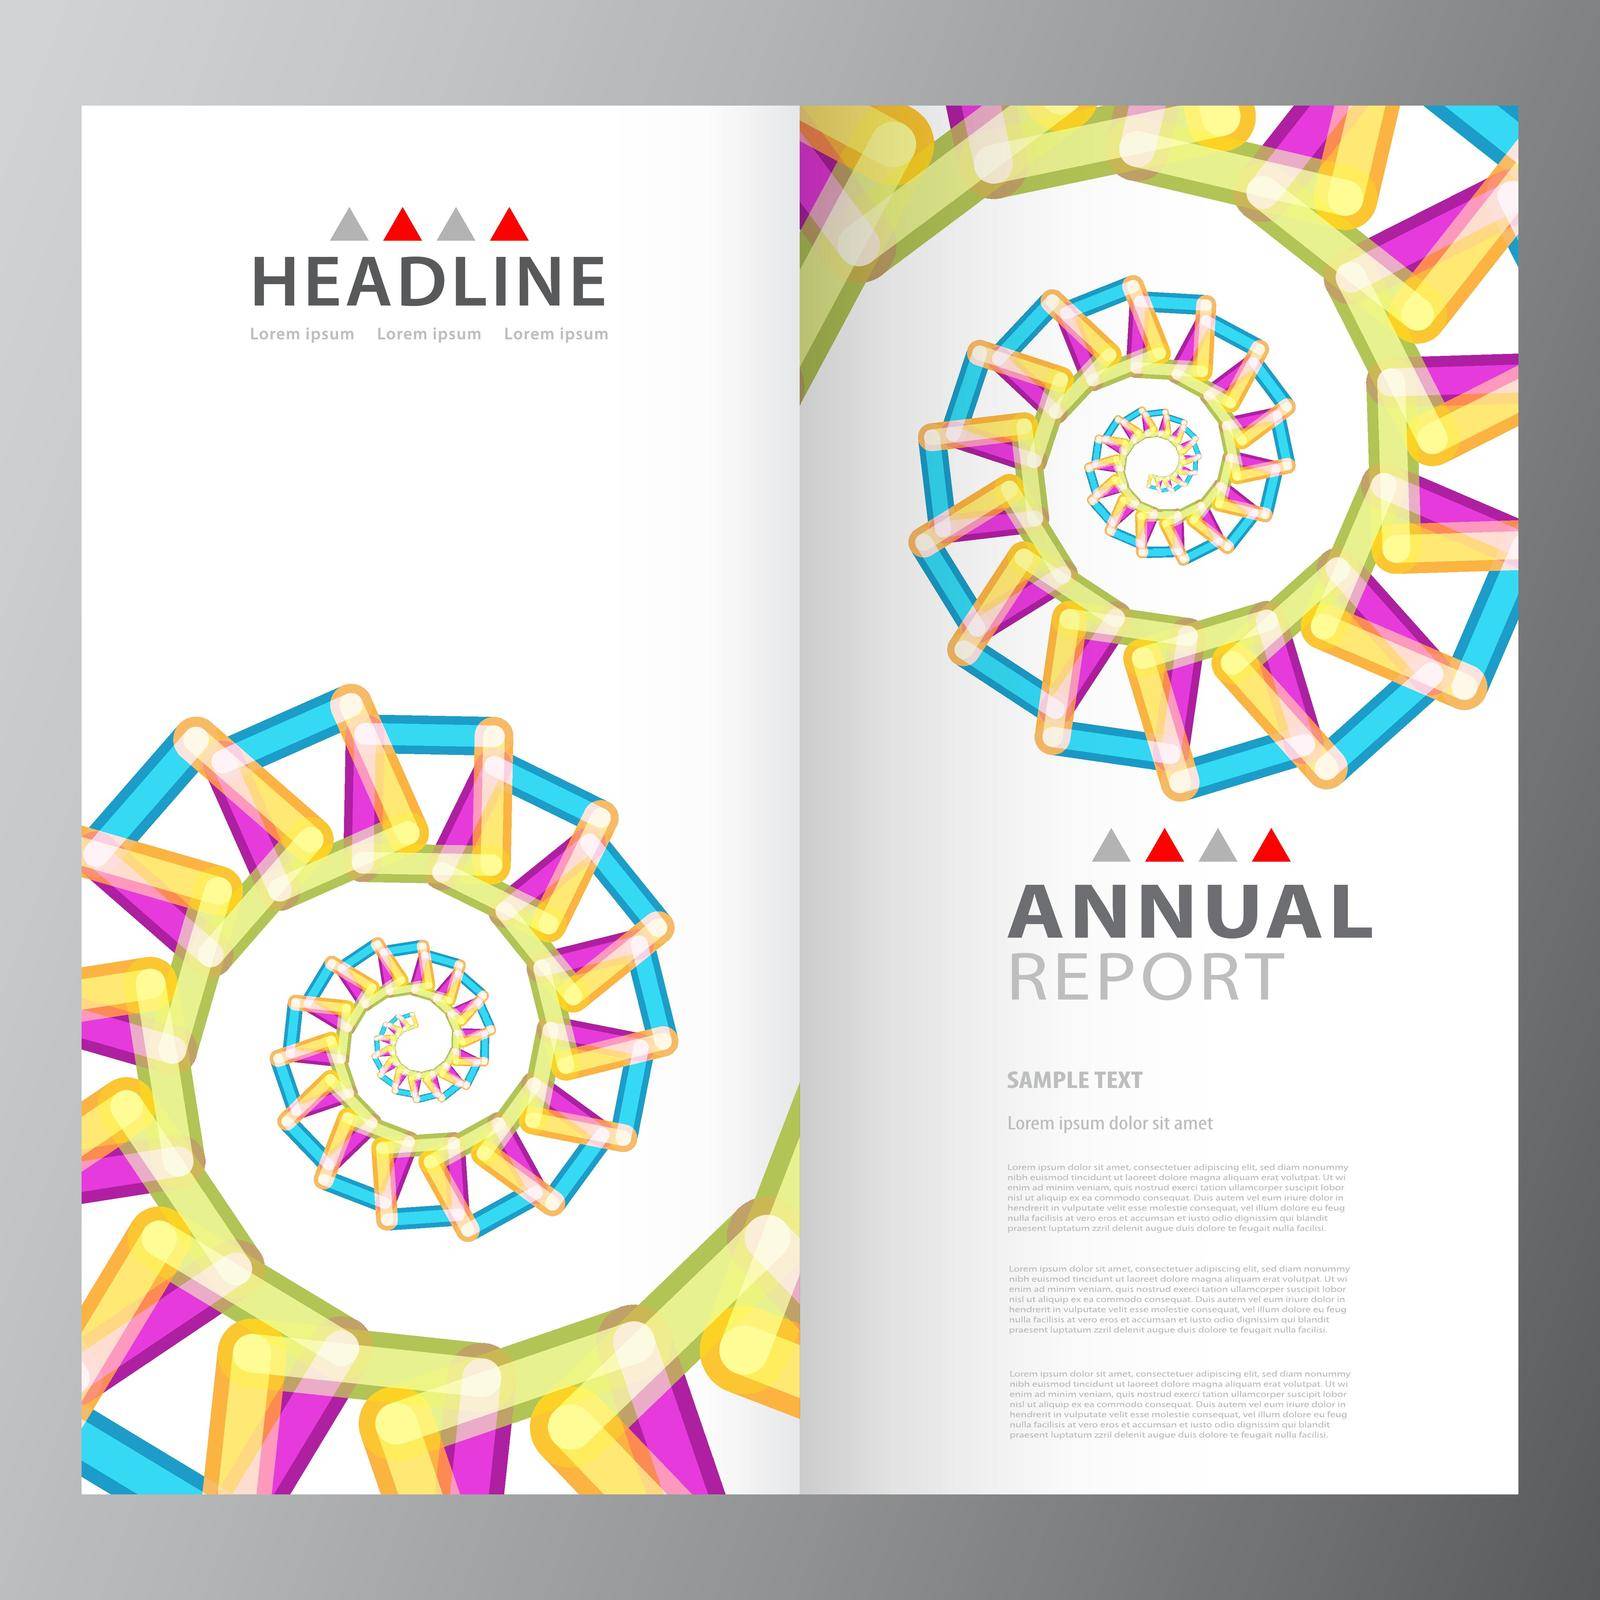 Annual business report template by stocklady